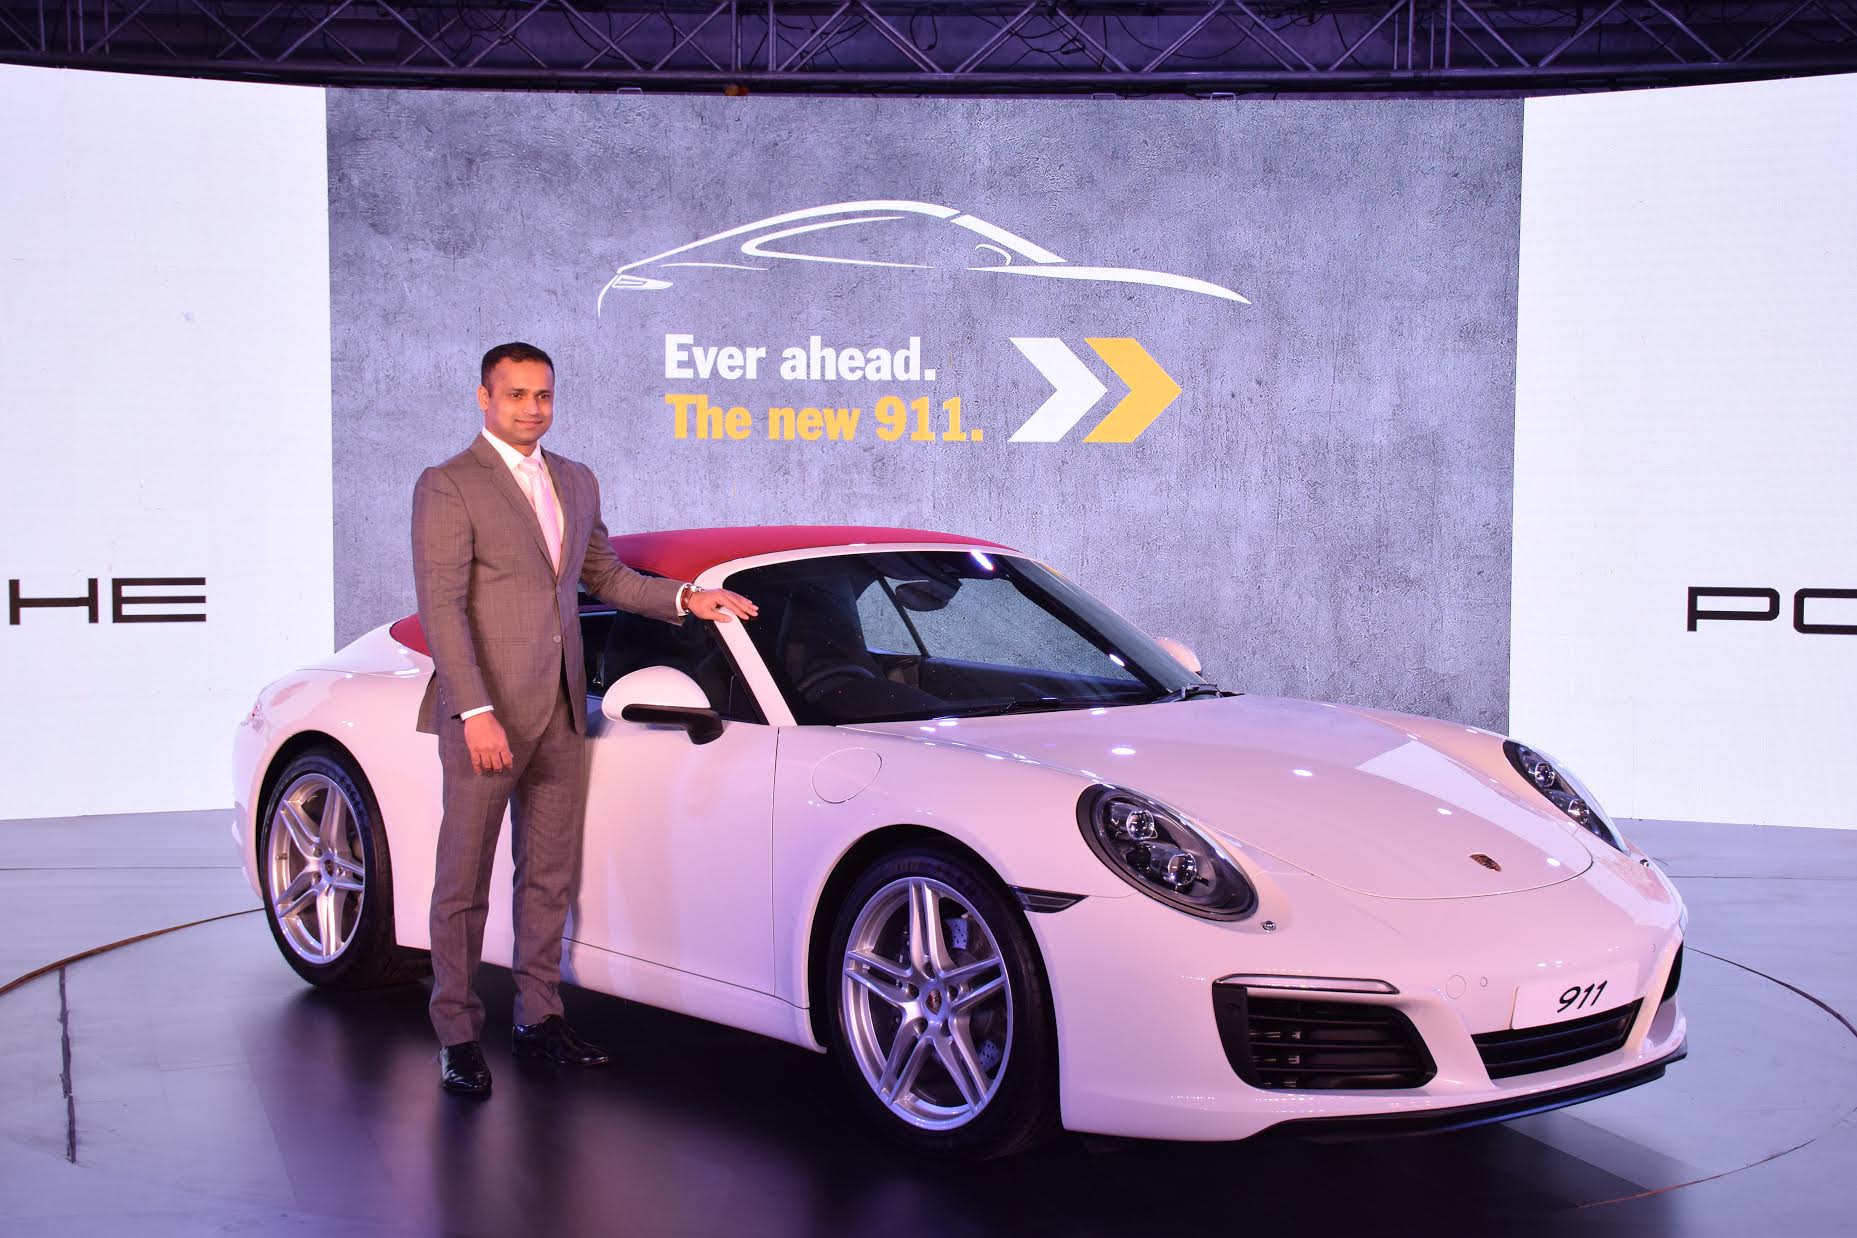 2017 Porsche 911 Carrera and Turbo range launched in India